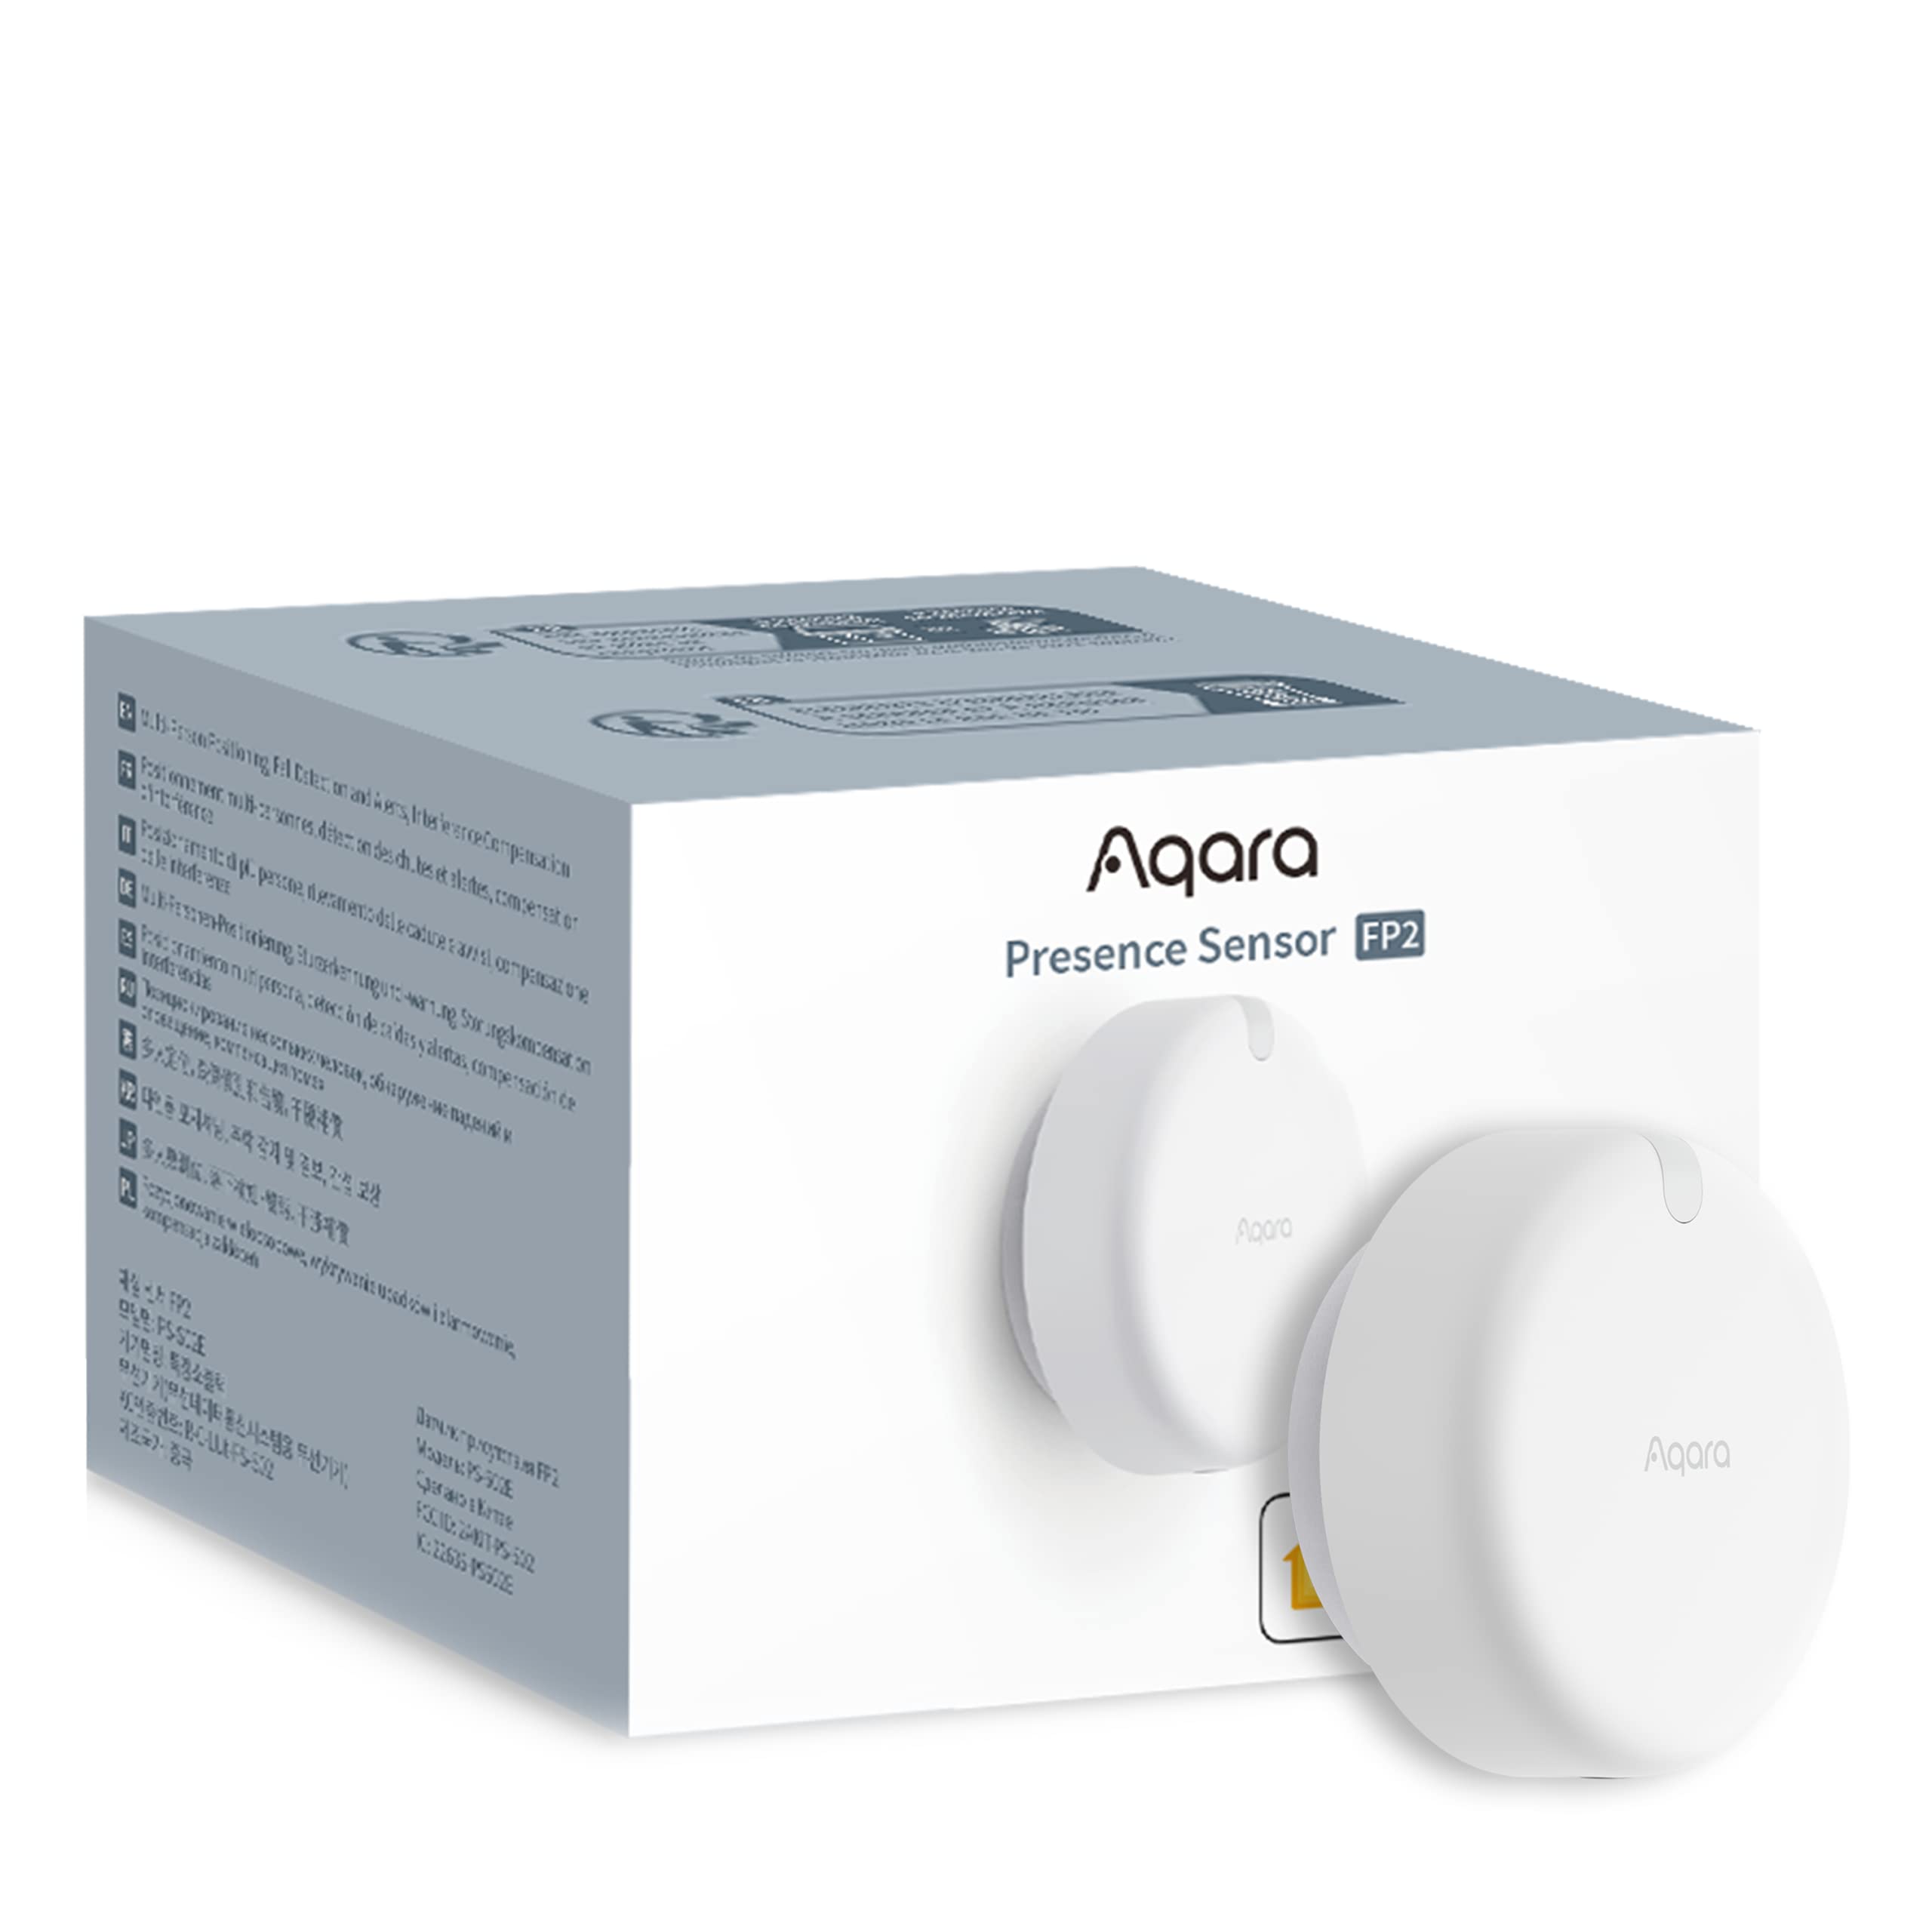 Aqara Presence Sensor FP2, mmWave Radar Wired Motion Sensor, Zone Positioning, Multi-Person & Fall Detection, Supports HomeKit, Alexa, Google Home and Home Assistant